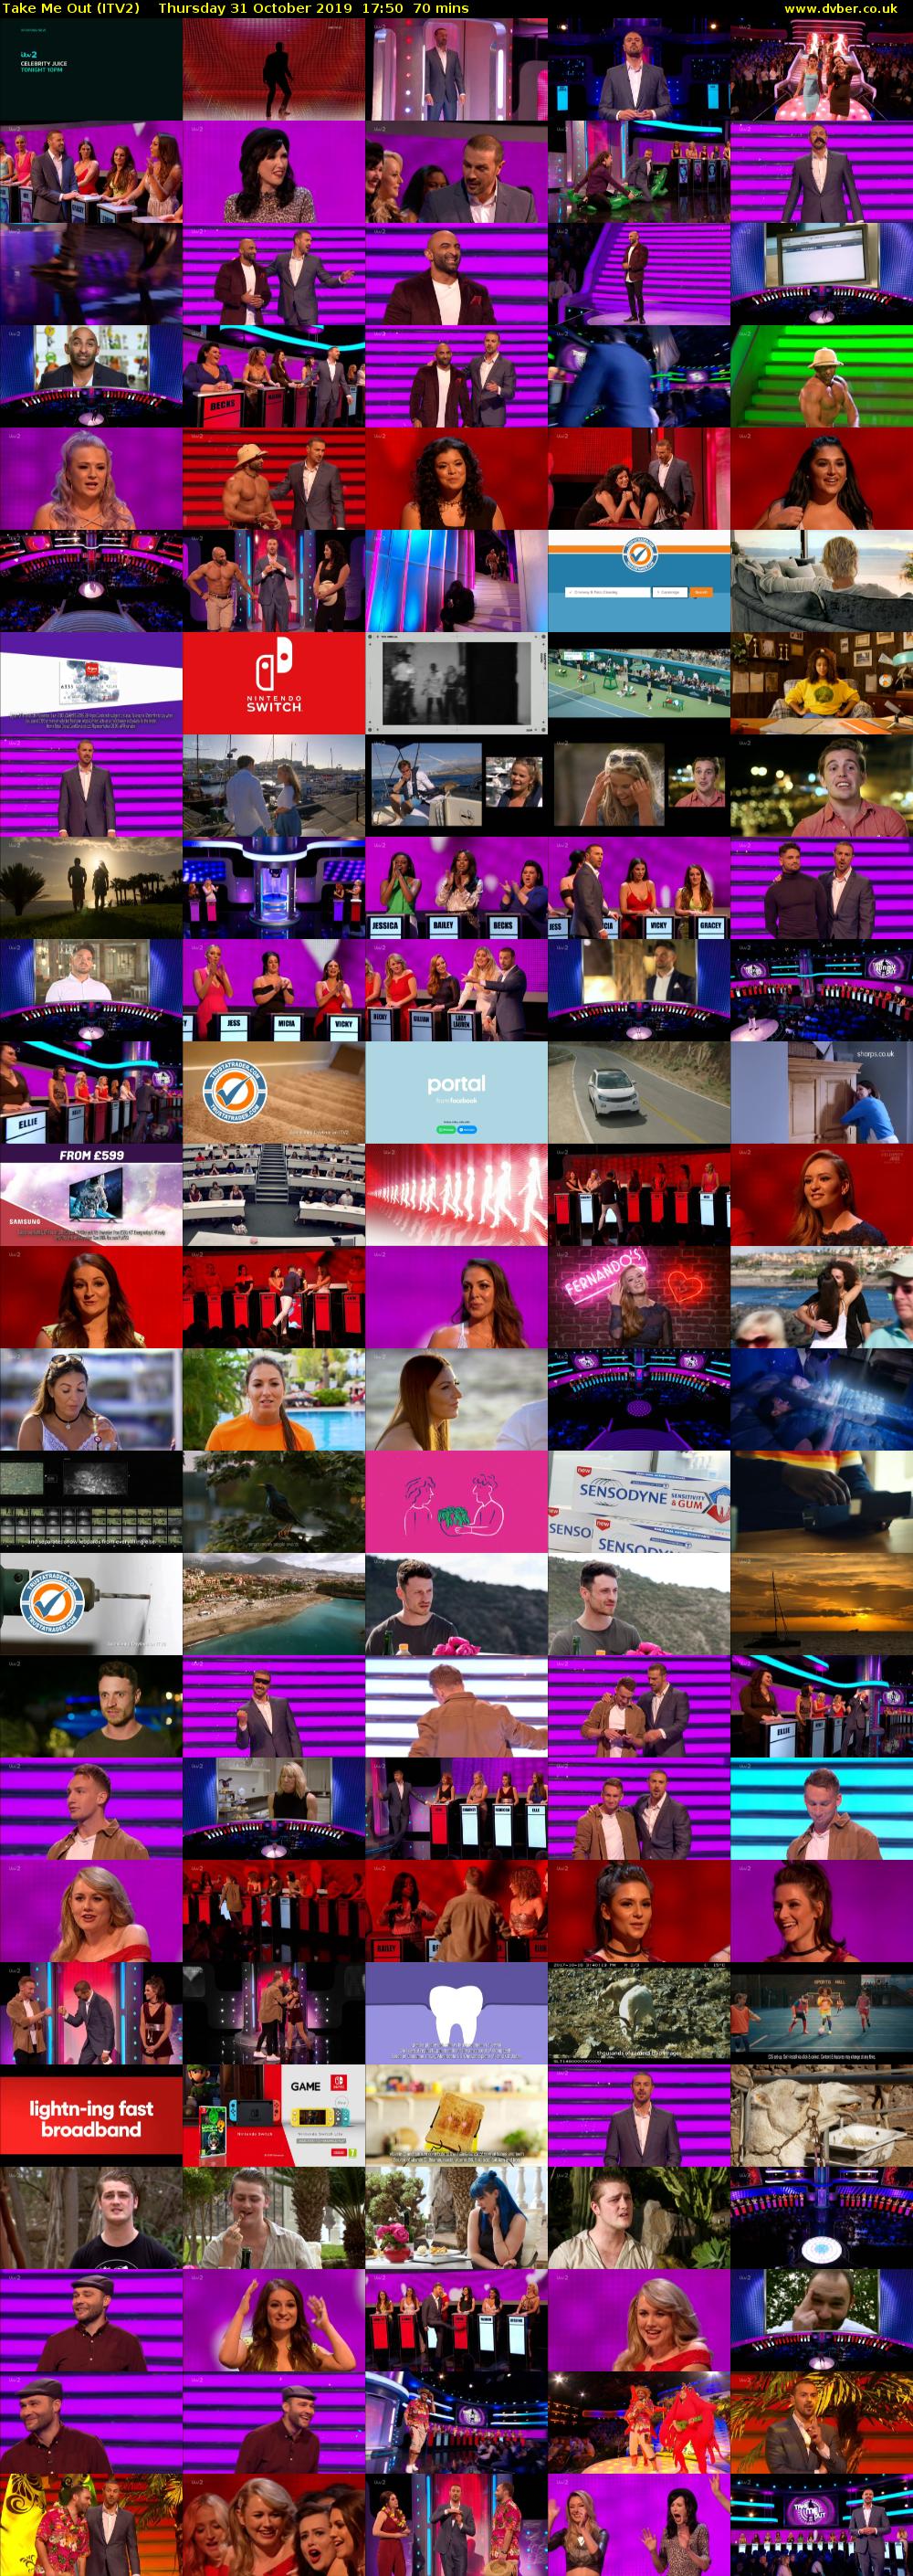 Take Me Out (ITV2) Thursday 31 October 2019 17:50 - 19:00